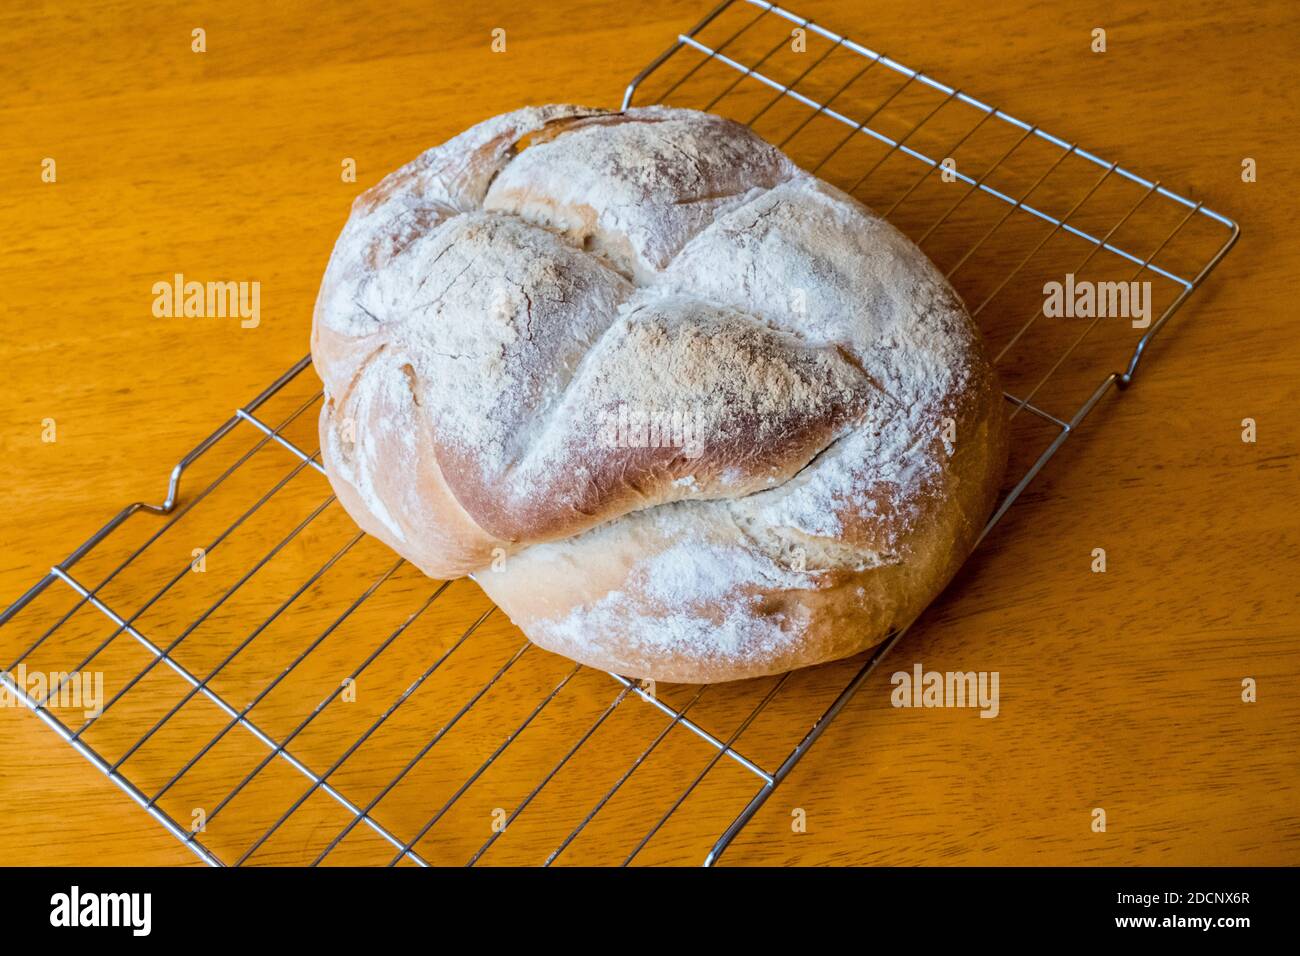 Freshly baked loaf of bread cooling on a wire rack Stock Photo